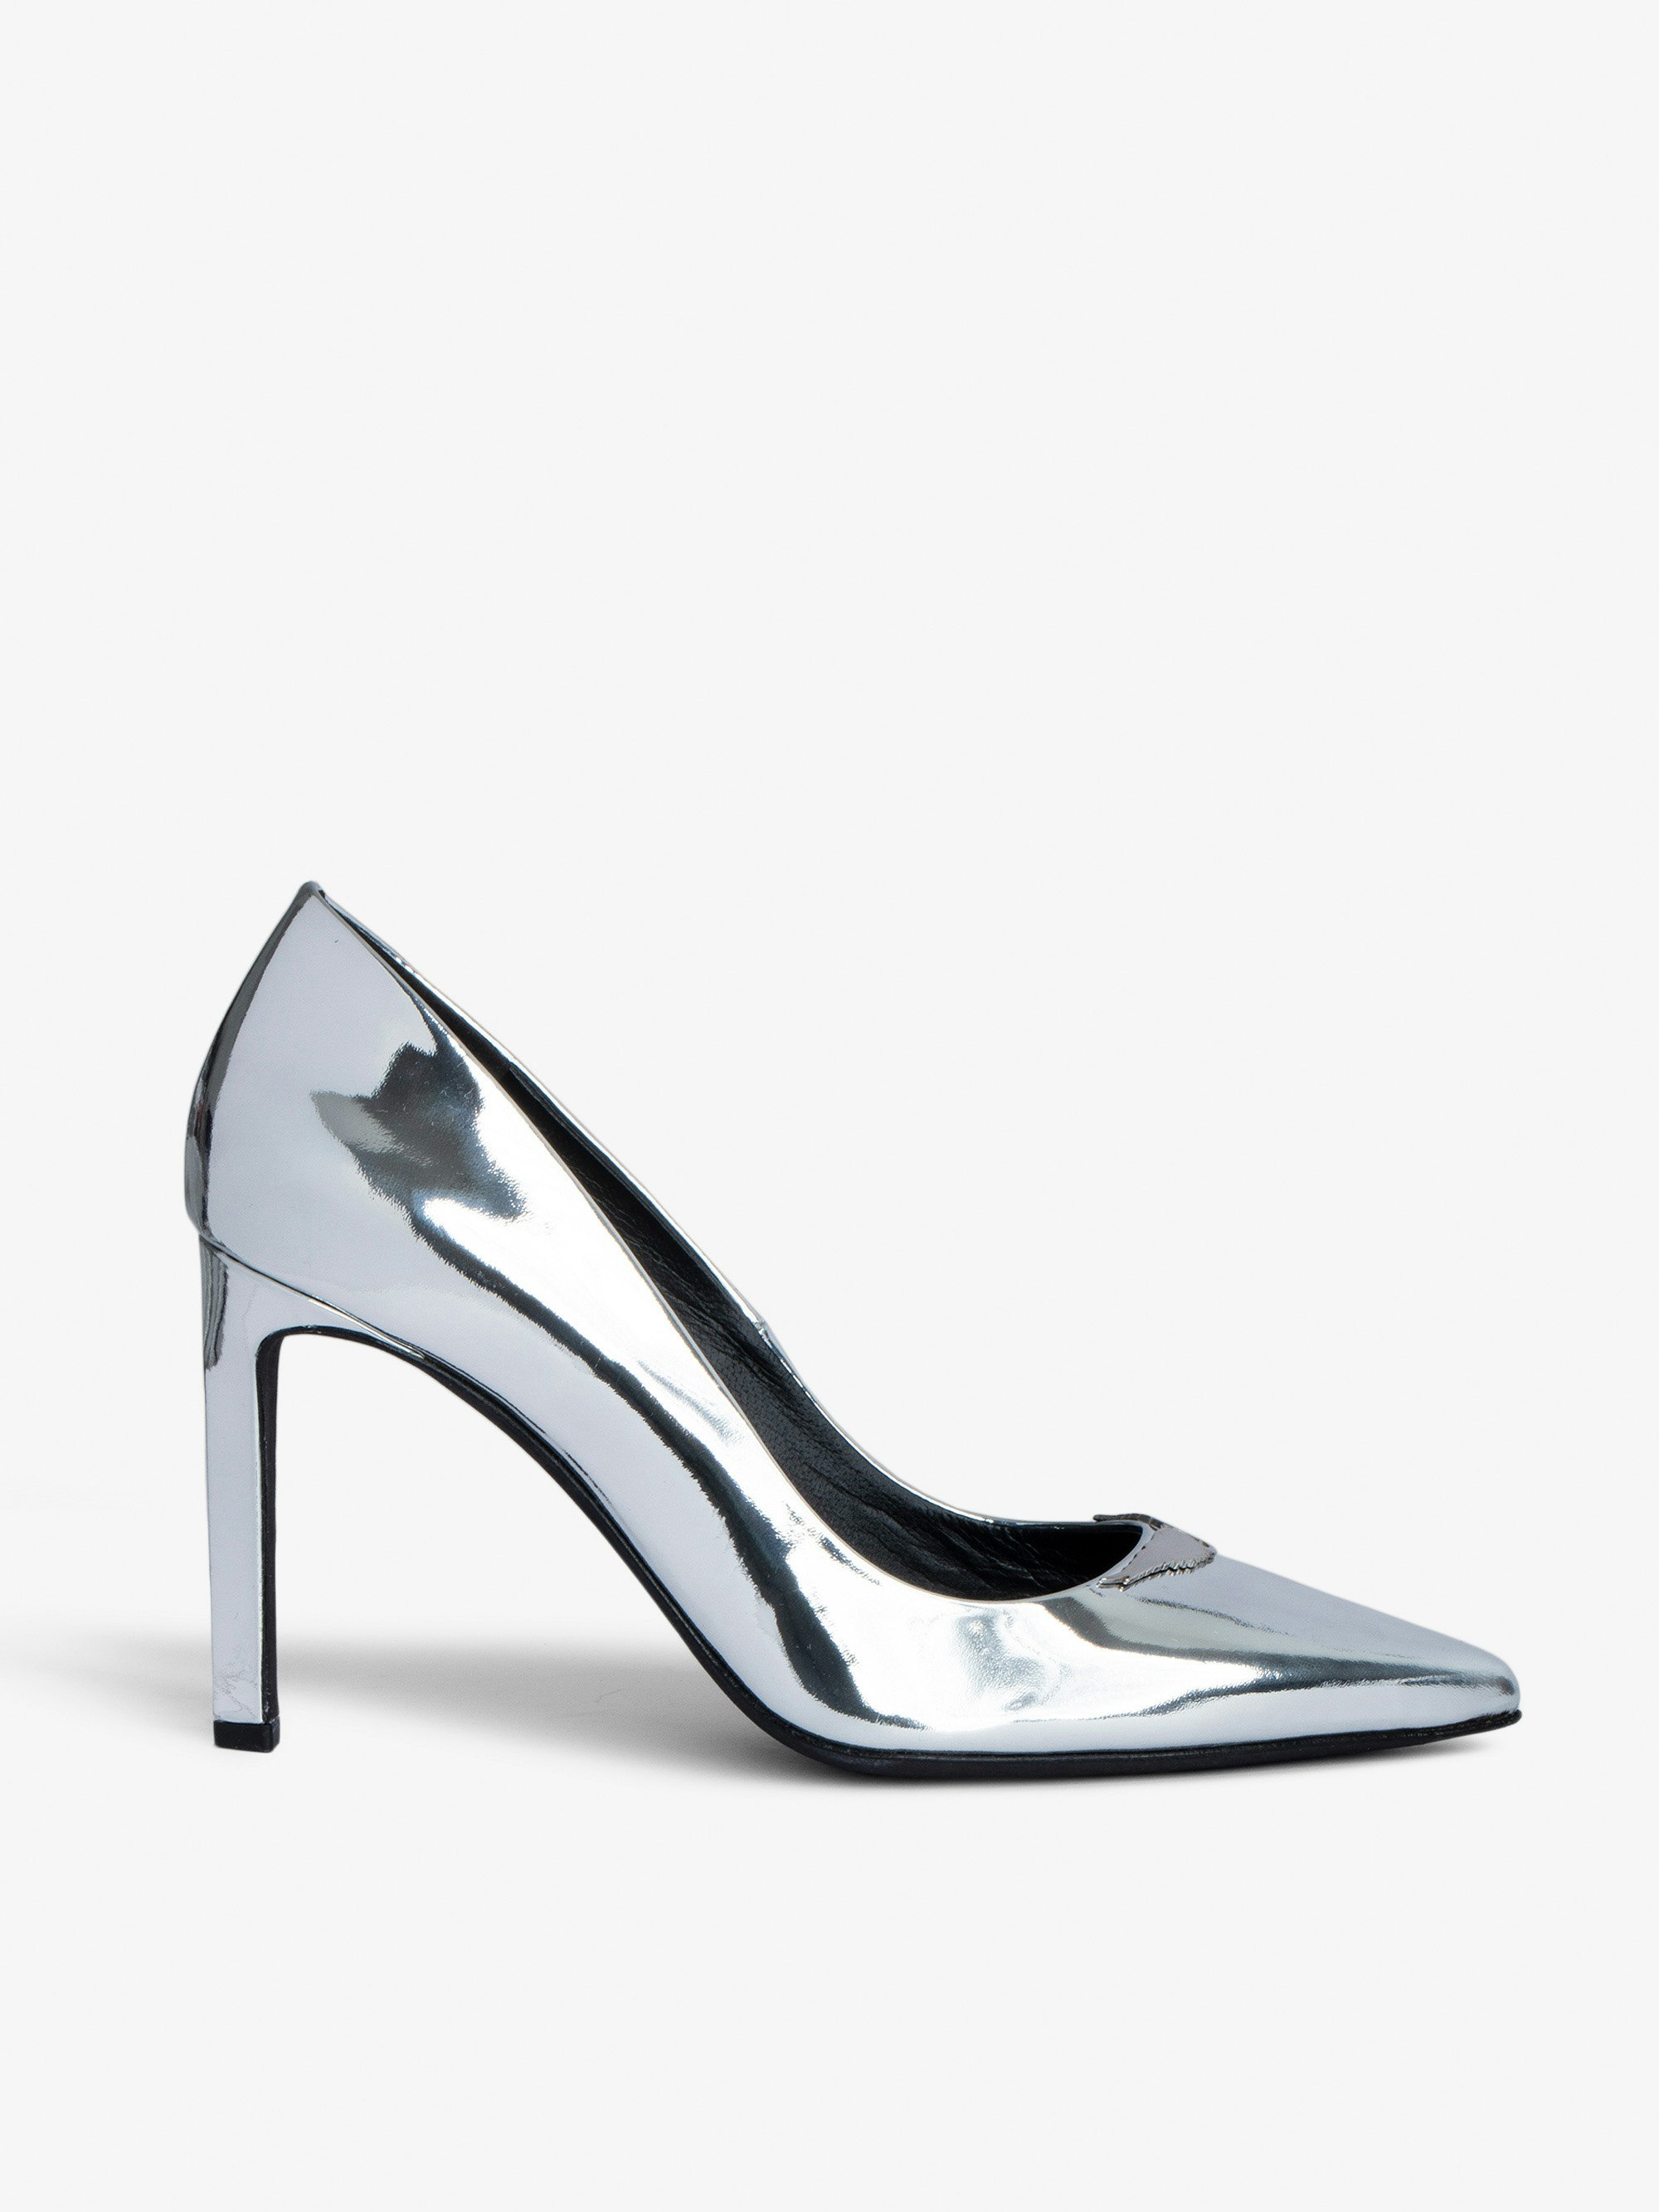 Perfect Court Shoes - Silver patent leather court shoes with mirror wings charm.